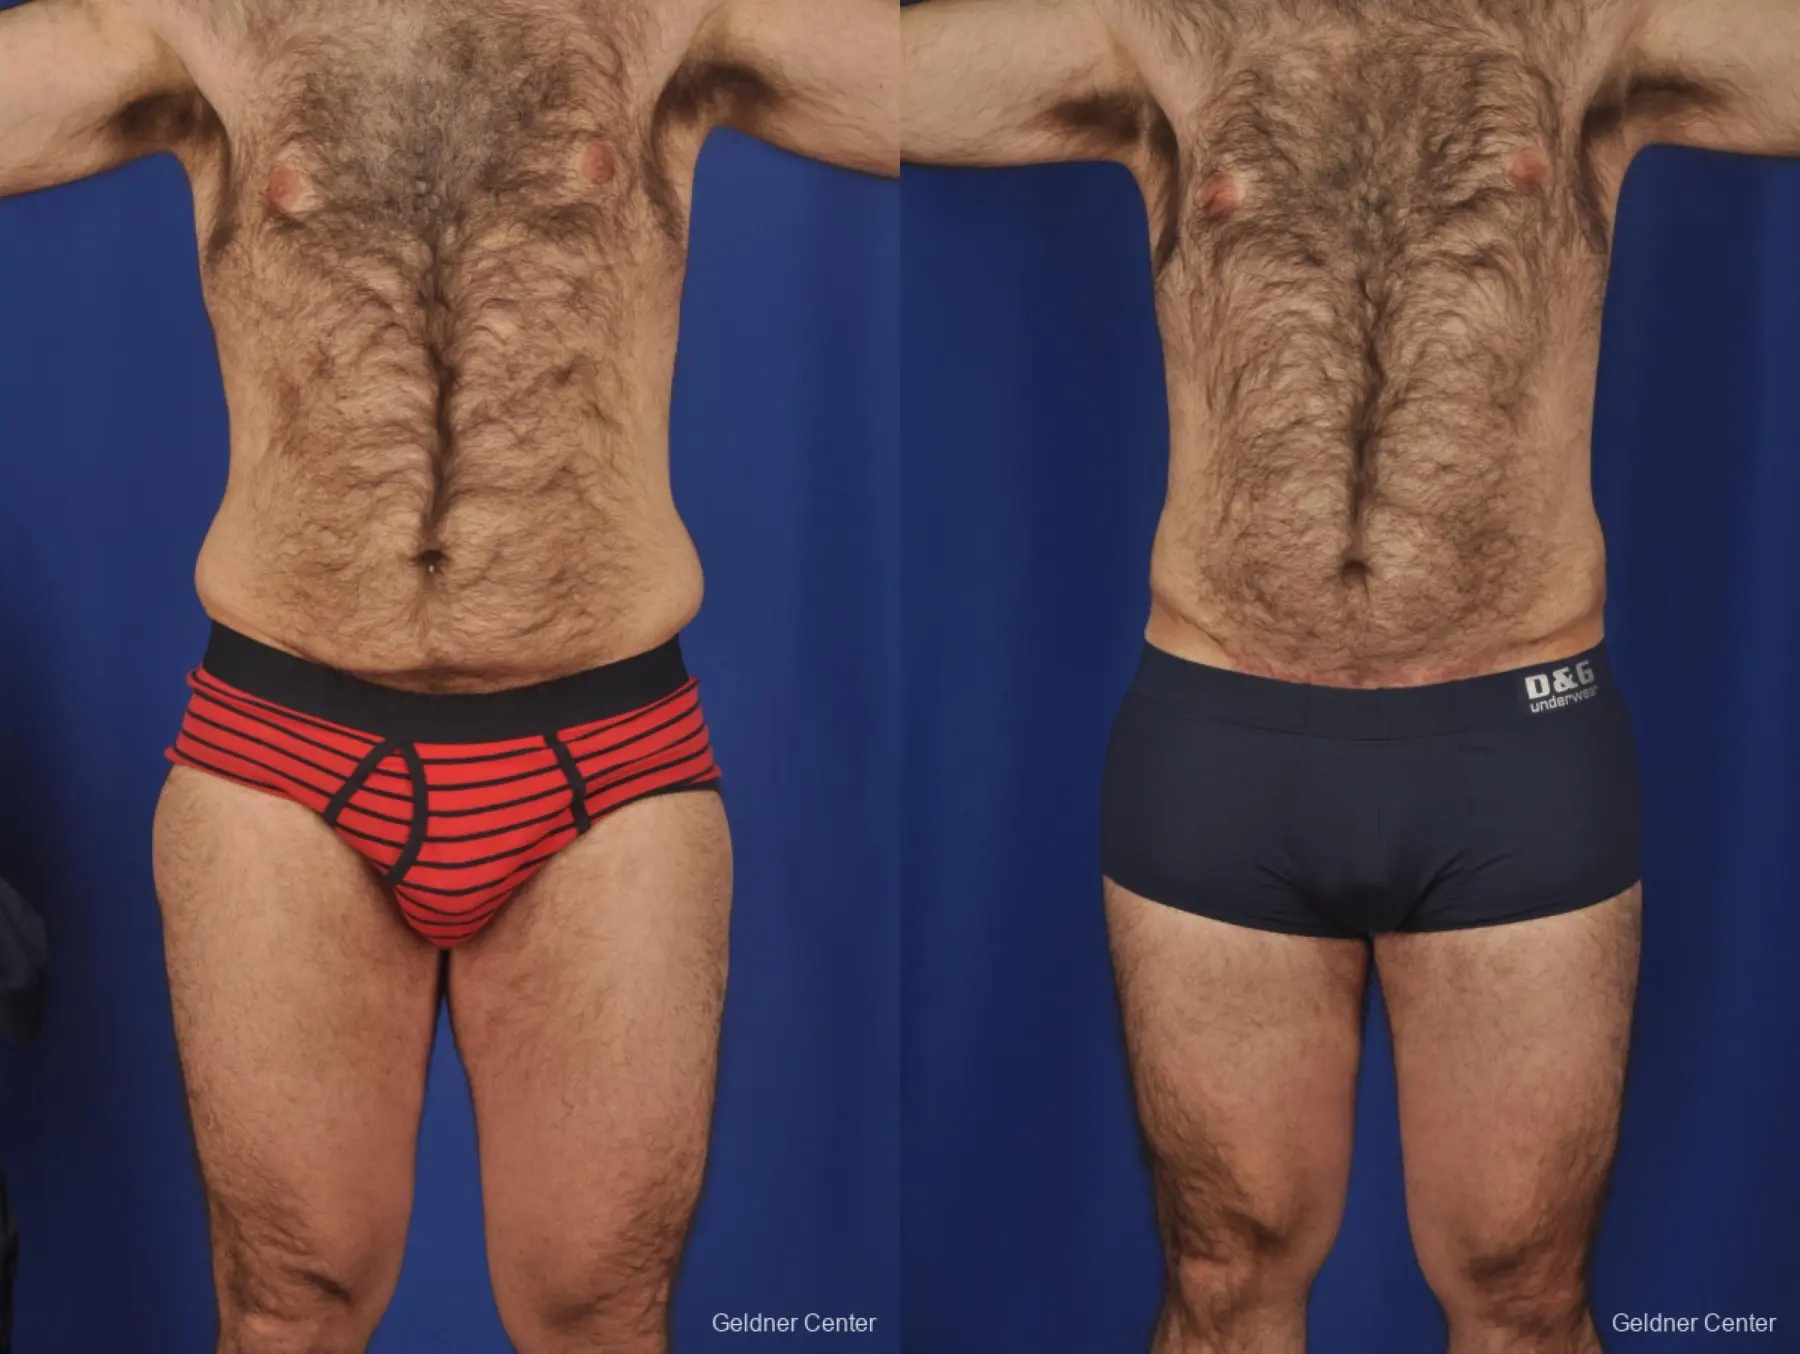 Abdominoplasty For Men: Patient 1 - Before and After 1